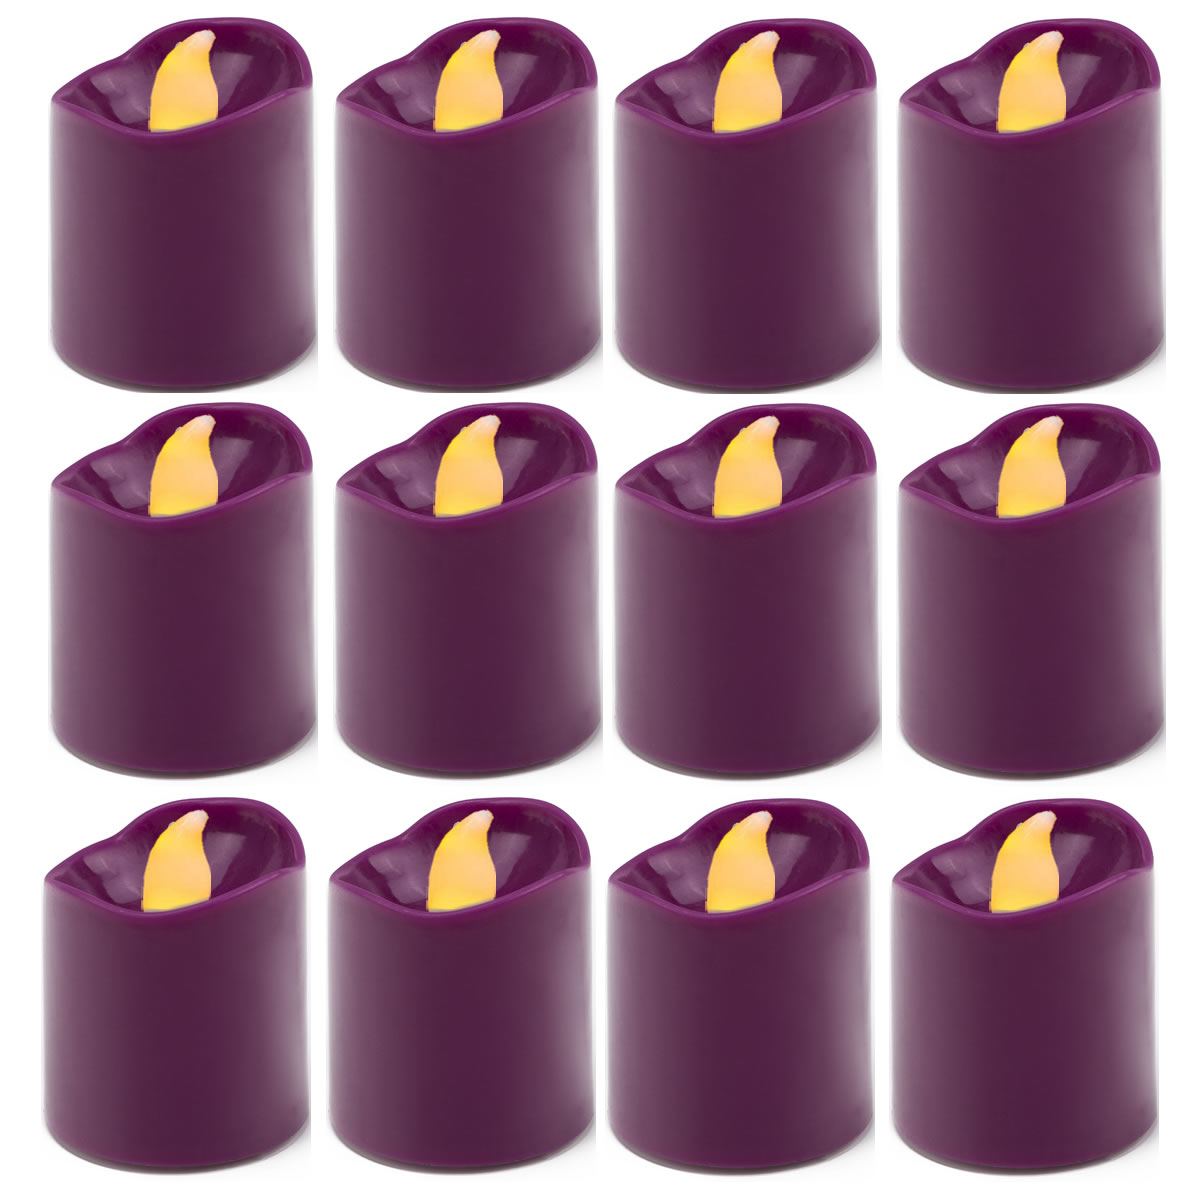 24 Fuchsia Flameless Battery Operated LED Flickering Amber Tea light Candles 